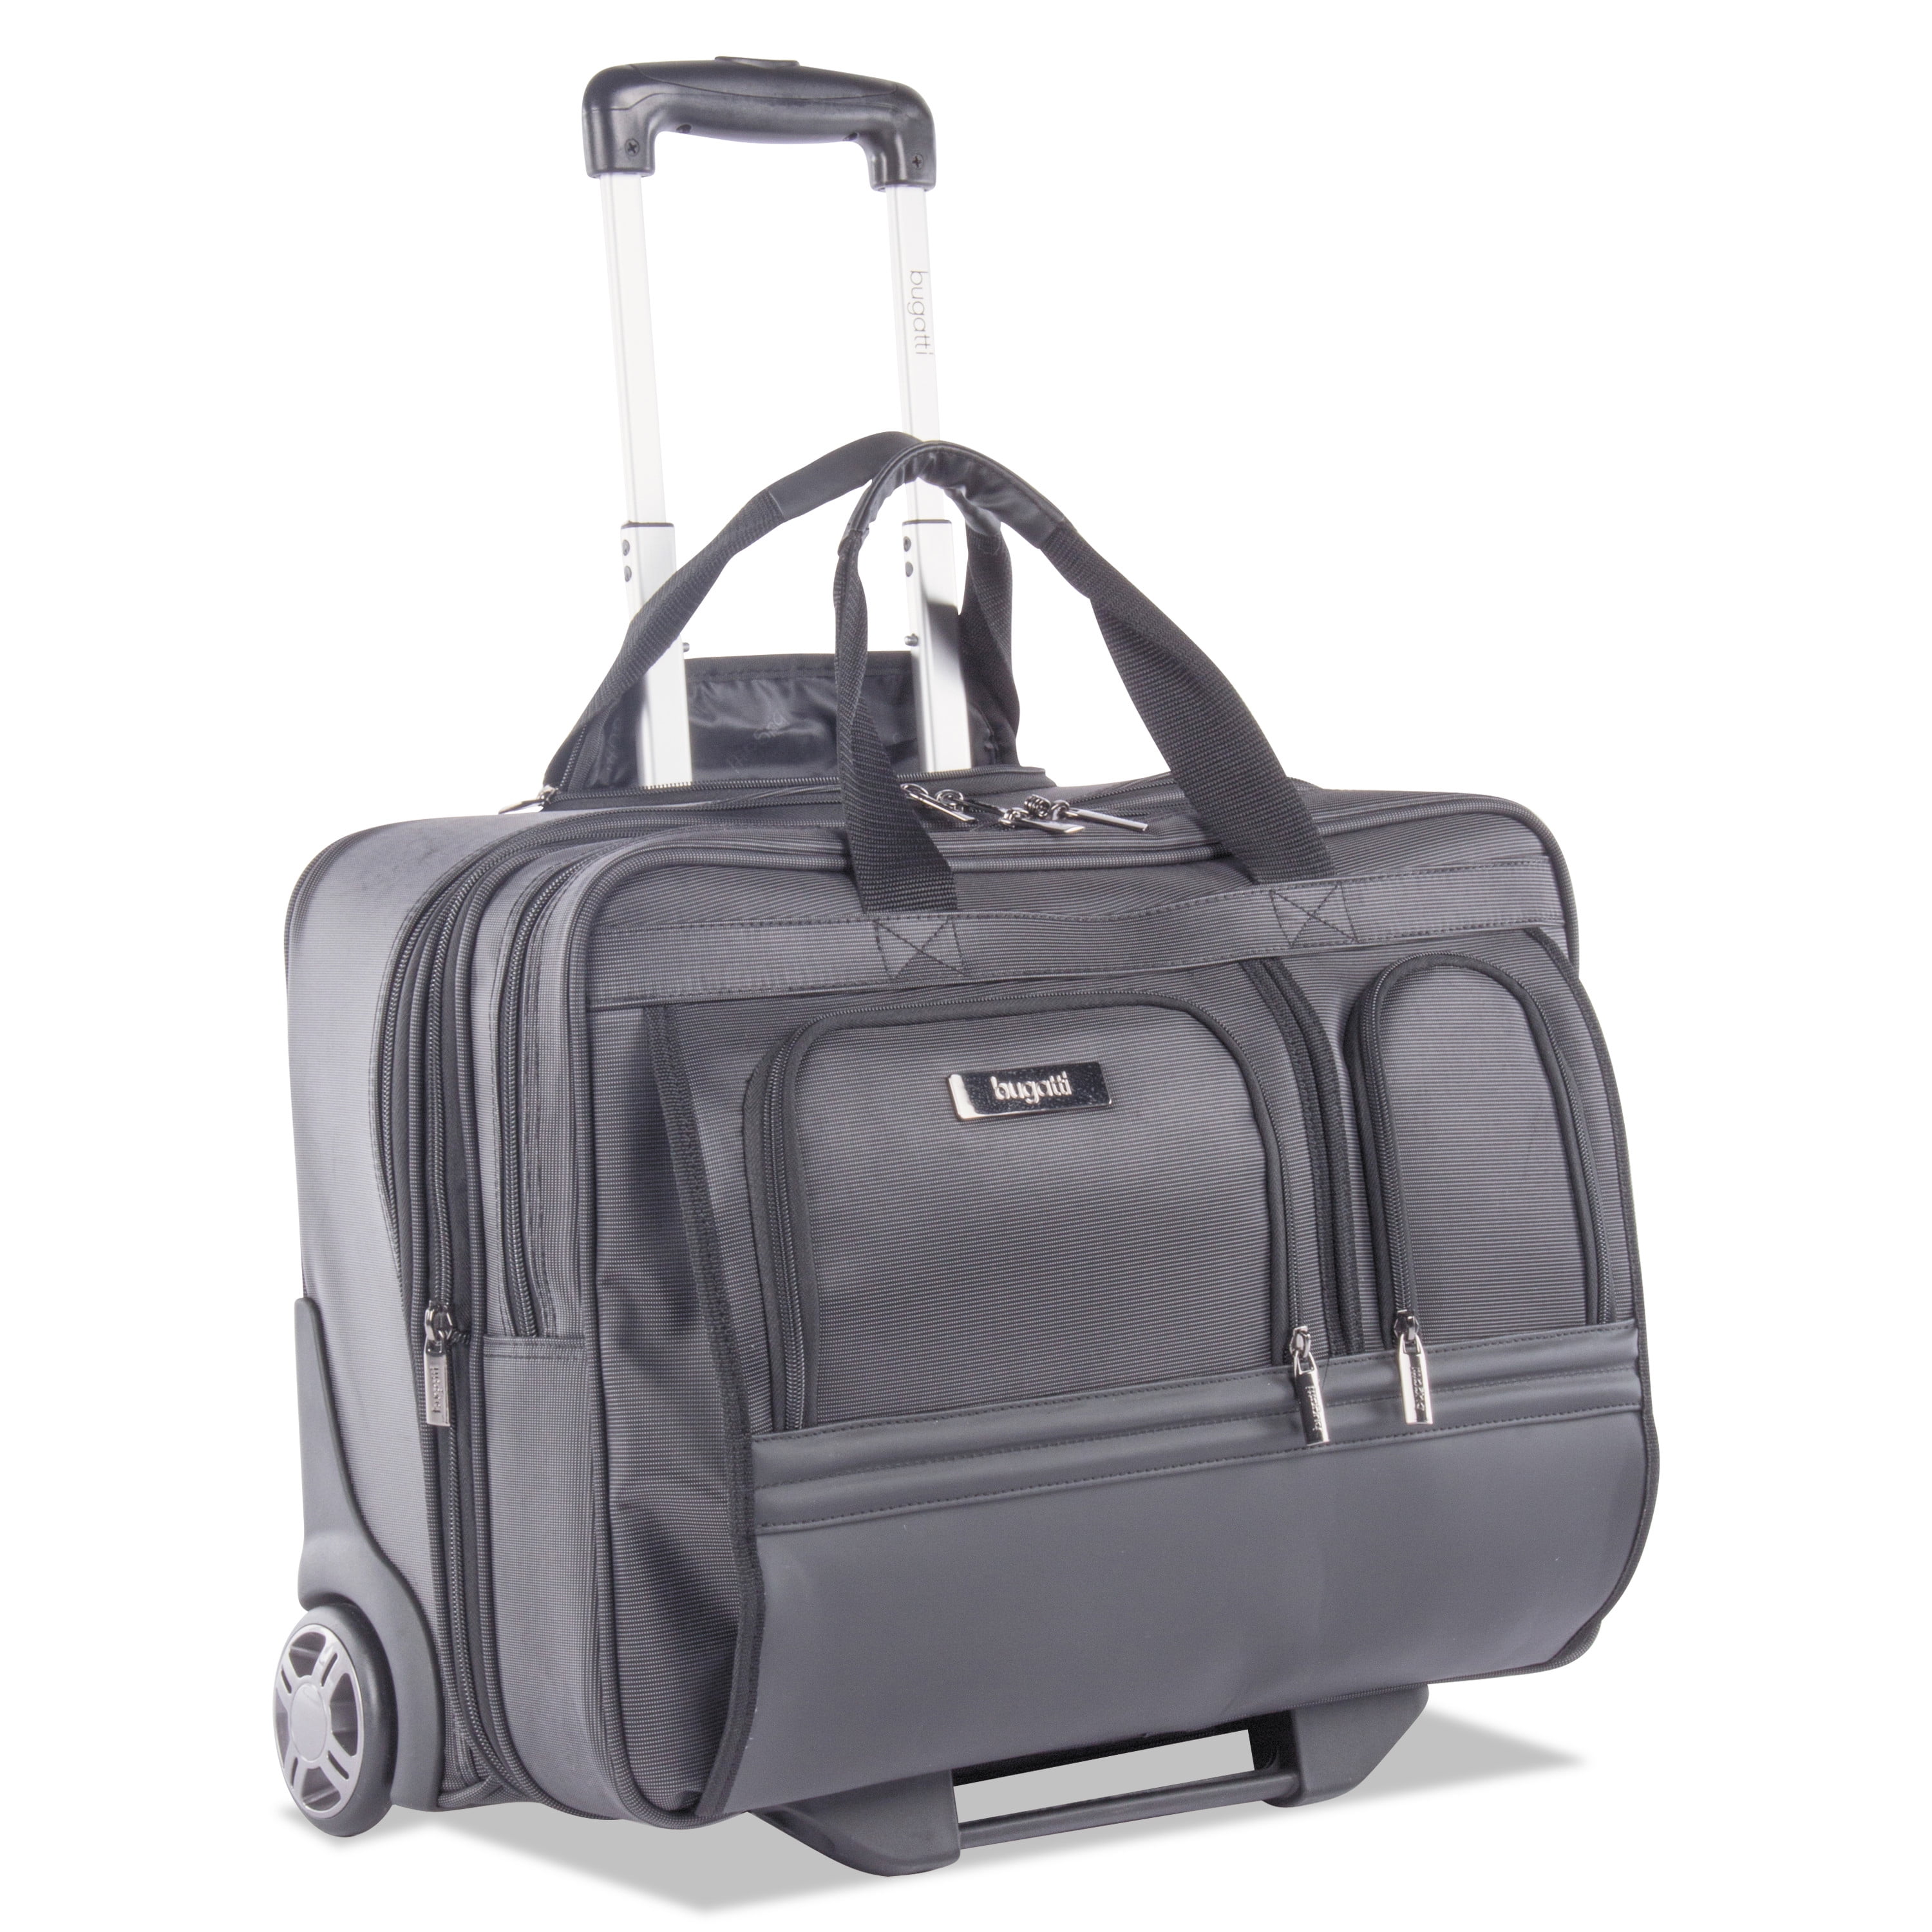 STEBCO Harry Business Case on Wheels, 8.25